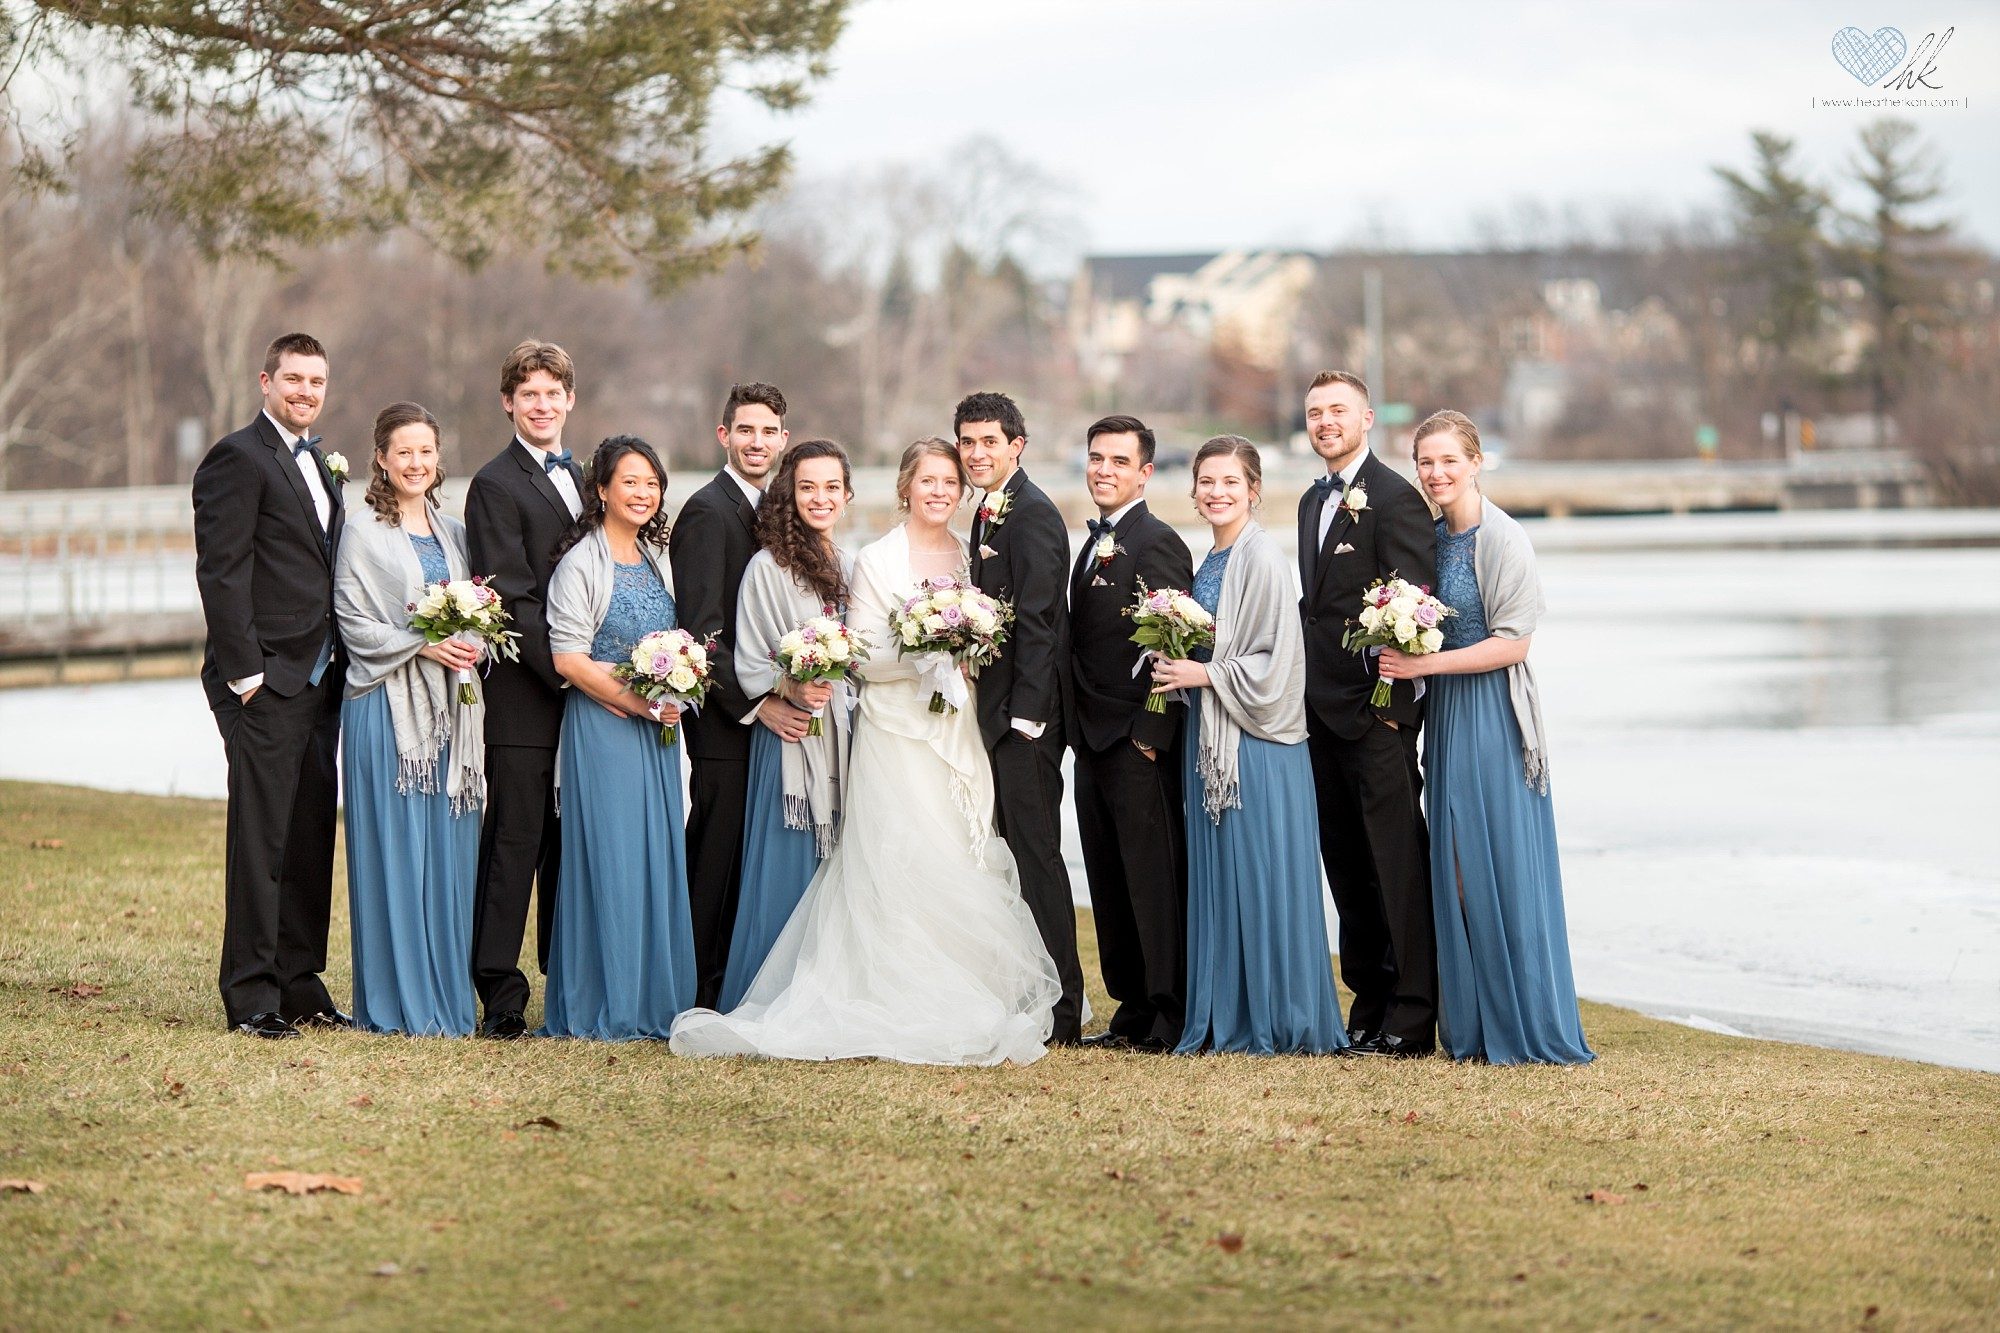 Winter wedding photographs in Plymouth, Michigan